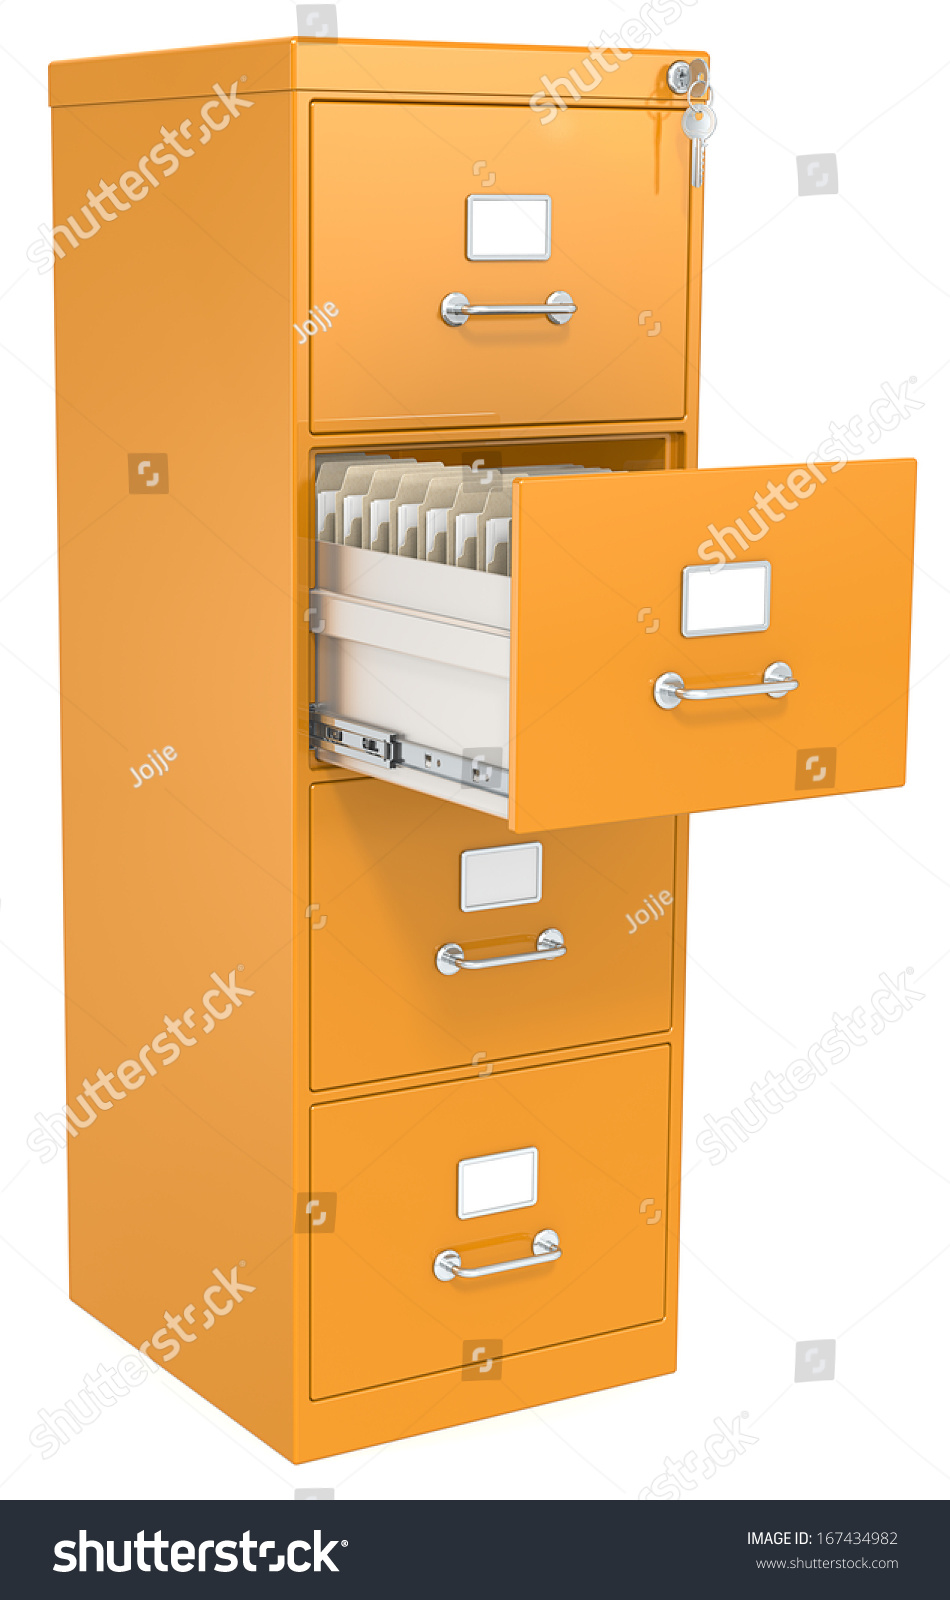 Locked Filing Cabinet Images Stock Photos Vectors Shutterstock